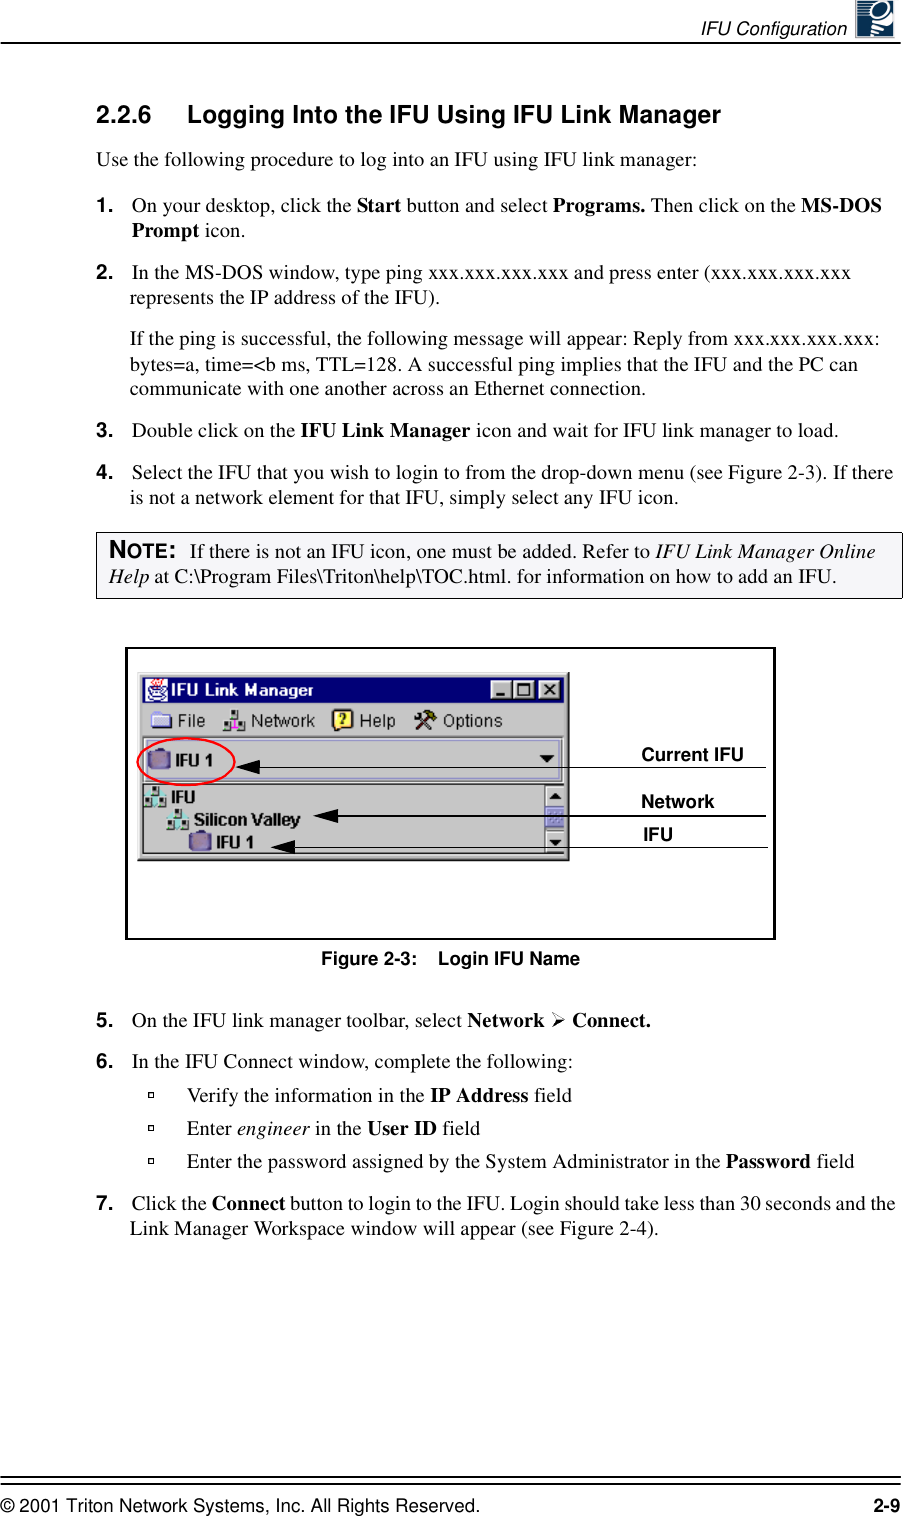 IFU Configuration © 2001 Triton Network Systems, Inc. All Rights Reserved. 2-92.2.6 Logging Into the IFU Using IFU Link ManagerUse the following procedure to log into an IFU using IFU link manager:1. On your desktop, click the Start button and select Programs. Then click on the MS-DOS Prompt icon.2. In the MS-DOS window, type ping xxx.xxx.xxx.xxx and press enter (xxx.xxx.xxx.xxx represents the IP address of the IFU).If the ping is successful, the following message will appear: Reply from xxx.xxx.xxx.xxx: bytes=a, time=&lt;b ms, TTL=128. A successful ping implies that the IFU and the PC can communicate with one another across an Ethernet connection. 3. Double click on the IFU Link Manager icon and wait for IFU link manager to load.4. Select the IFU that you wish to login to from the drop-down menu (see Figure 2-3). If there is not a network element for that IFU, simply select any IFU icon.Figure 2-3:    Login IFU Name5. On the IFU link manager toolbar, select Network   Connect. 6. In the IFU Connect window, complete the following:Verify the information in the IP Address fieldEnter engineer in the User ID fieldEnter the password assigned by the System Administrator in the Password field7. Click the Connect button to login to the IFU. Login should take less than 30 seconds and the Link Manager Workspace window will appear (see Figure 2-4).NOTE:  If there is not an IFU icon, one must be added. Refer to IFU Link Manager Online Help at C:\Program Files\Triton\help\TOC.html. for information on how to add an IFU.Current IFUNetwork IFU 